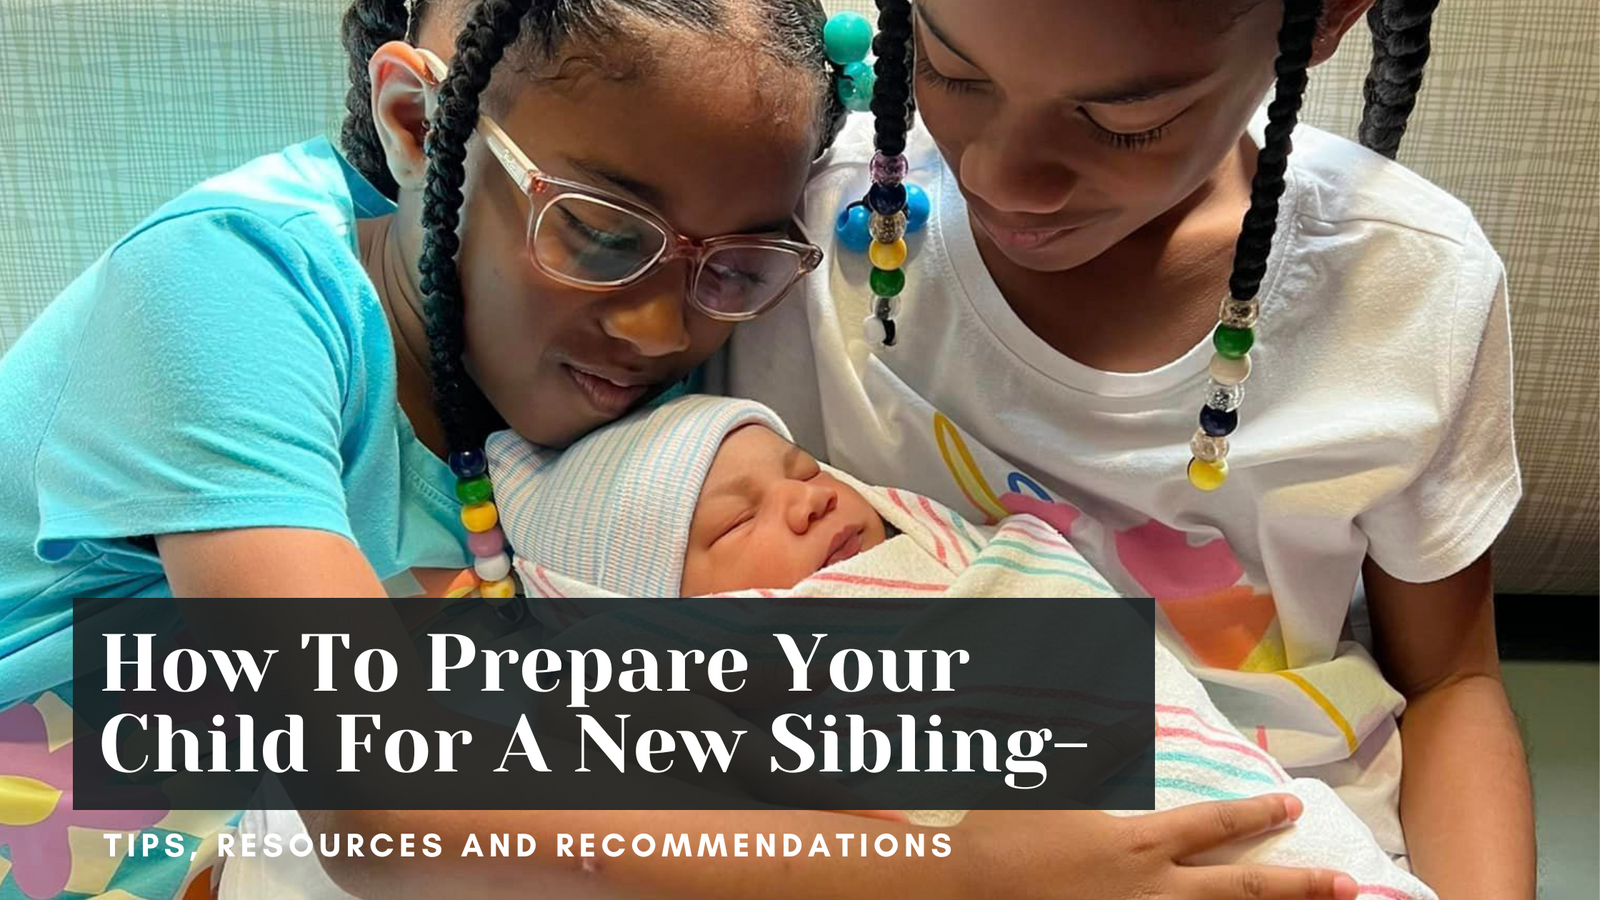 Introduce Older Siblings To New Baby: Do's and Don'ts